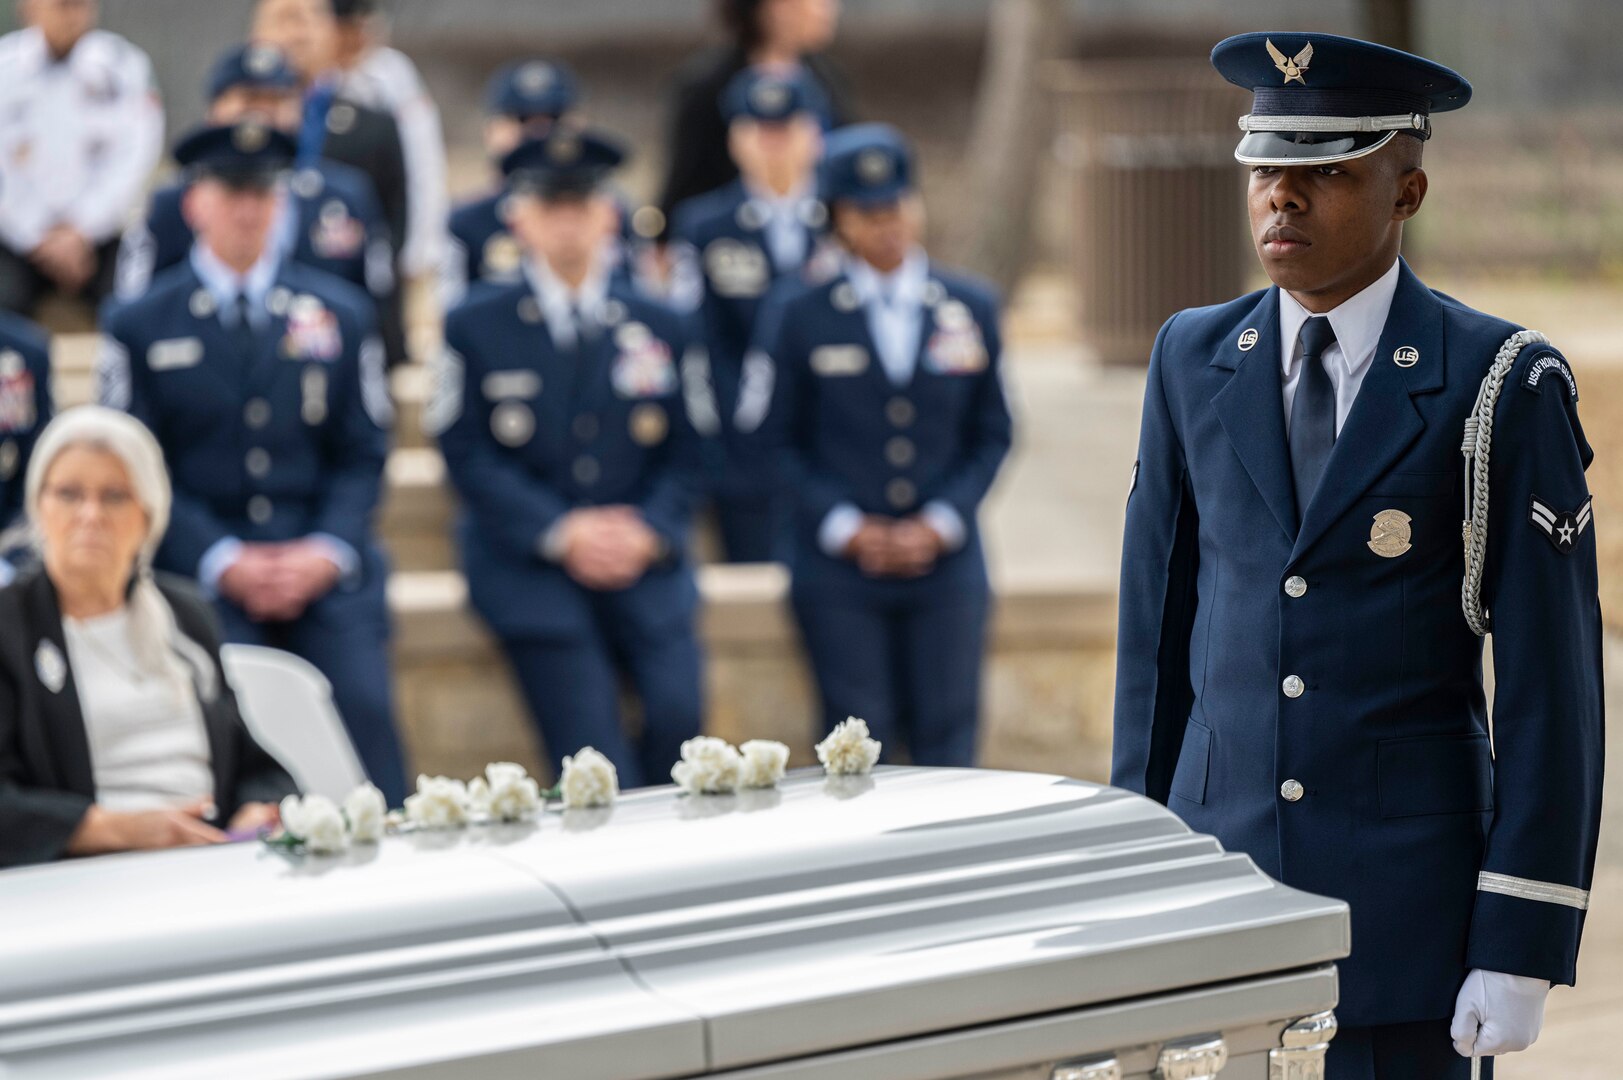 A U.S. Air Force Honor Guard member watches over the casket during the interment with full military honors of the fifth Chief Master Sgt. of the Air Force Robert D. Gaylor, Feb. 10, 2024 at Fort Sam Houston National Cemetery, Texas. Gaylor championed Air Force professional military education in the late '60s and '70s before he was promoted to Chief Master Sgt. of the Air Force in 1977. He continued to educate and inspire service members for more than 40 years after his retirement from military service. (U.S. Air Force photo by Tristin English).